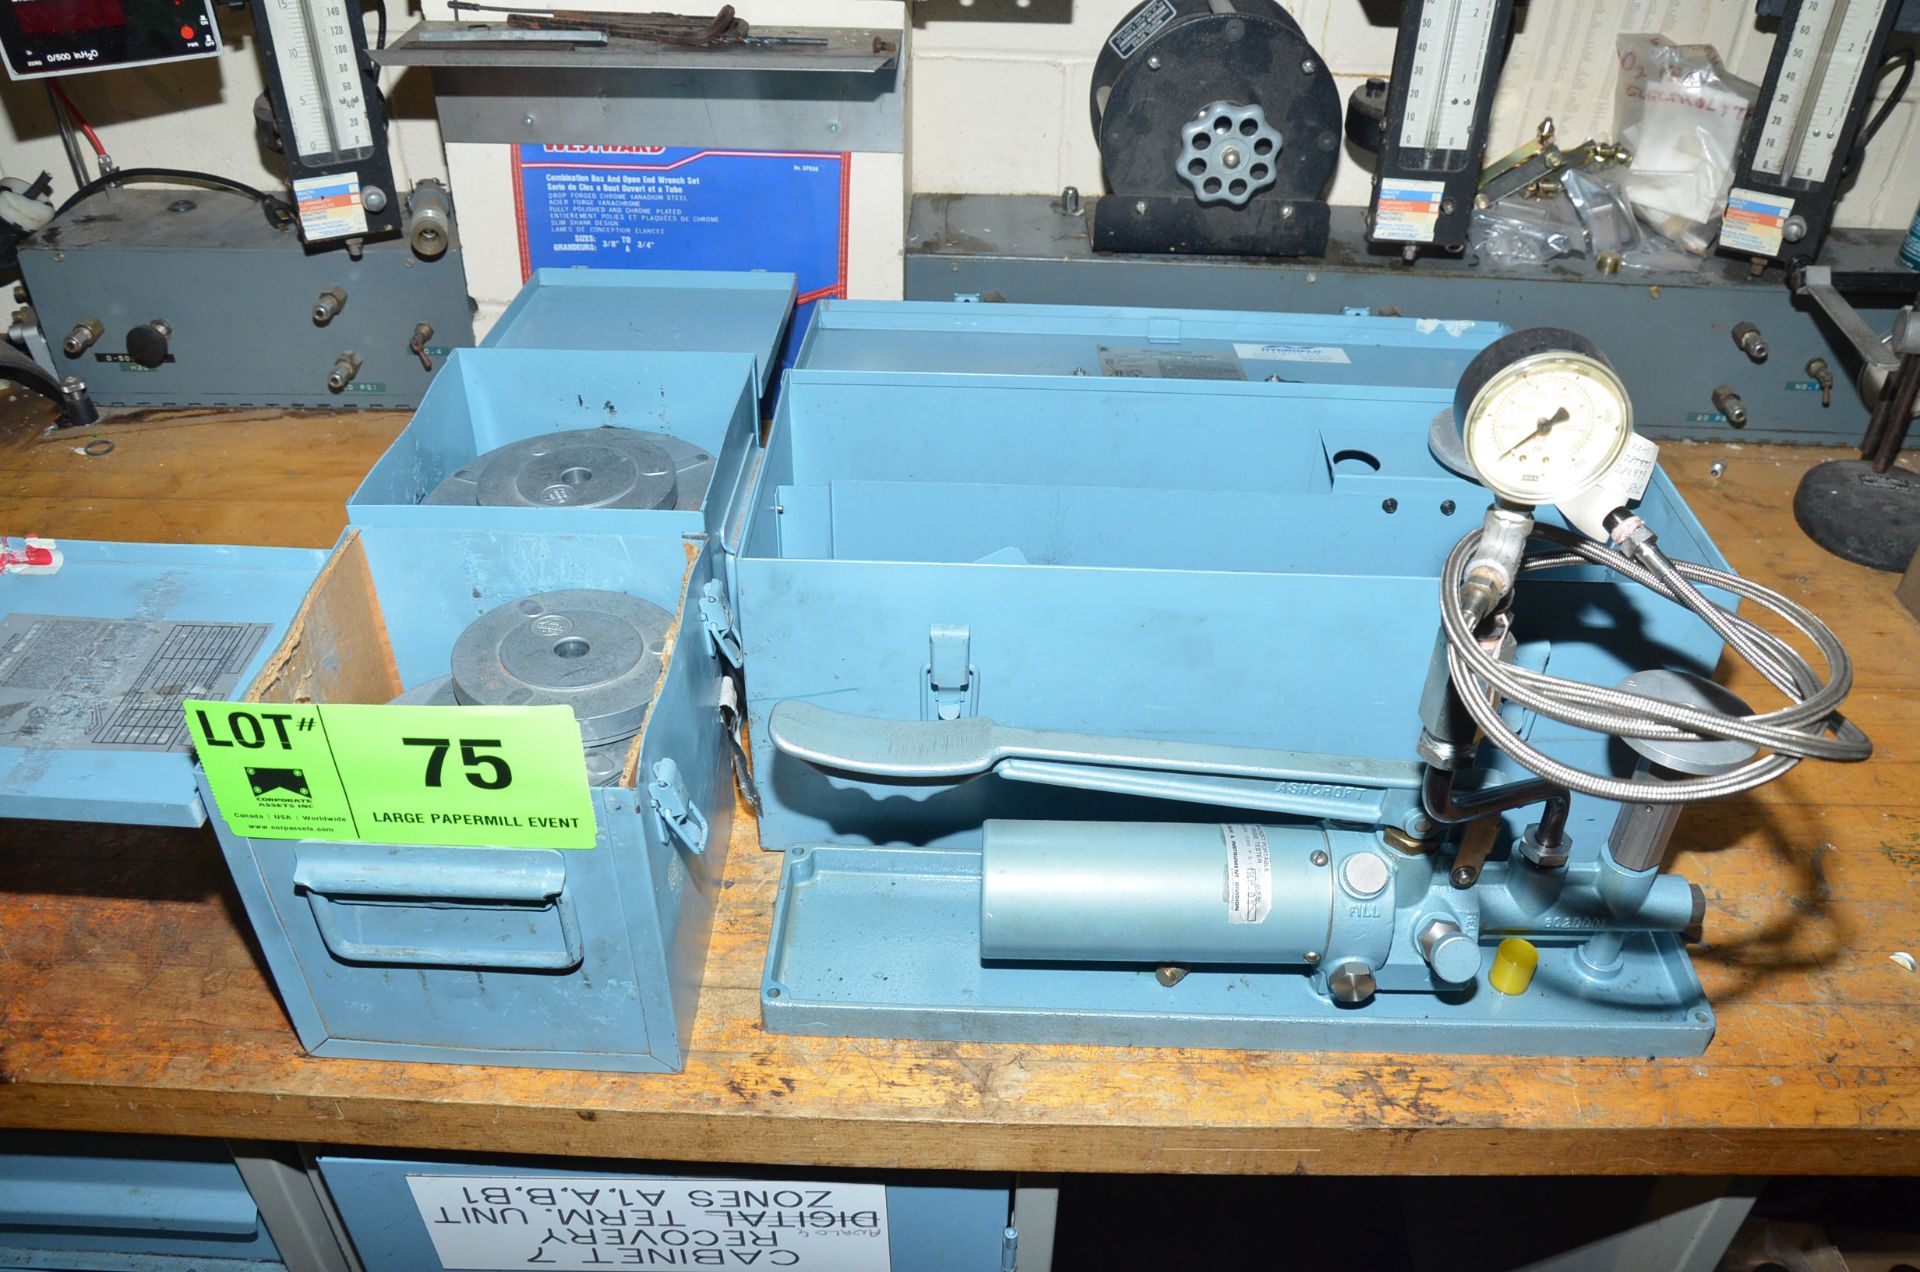 DRESSER TYPE 1305 ASHCROFT PORTABLE DEAD-WEIGHT TESTER WITH 10,000PSI CAPACITY, S/N: M5081 [